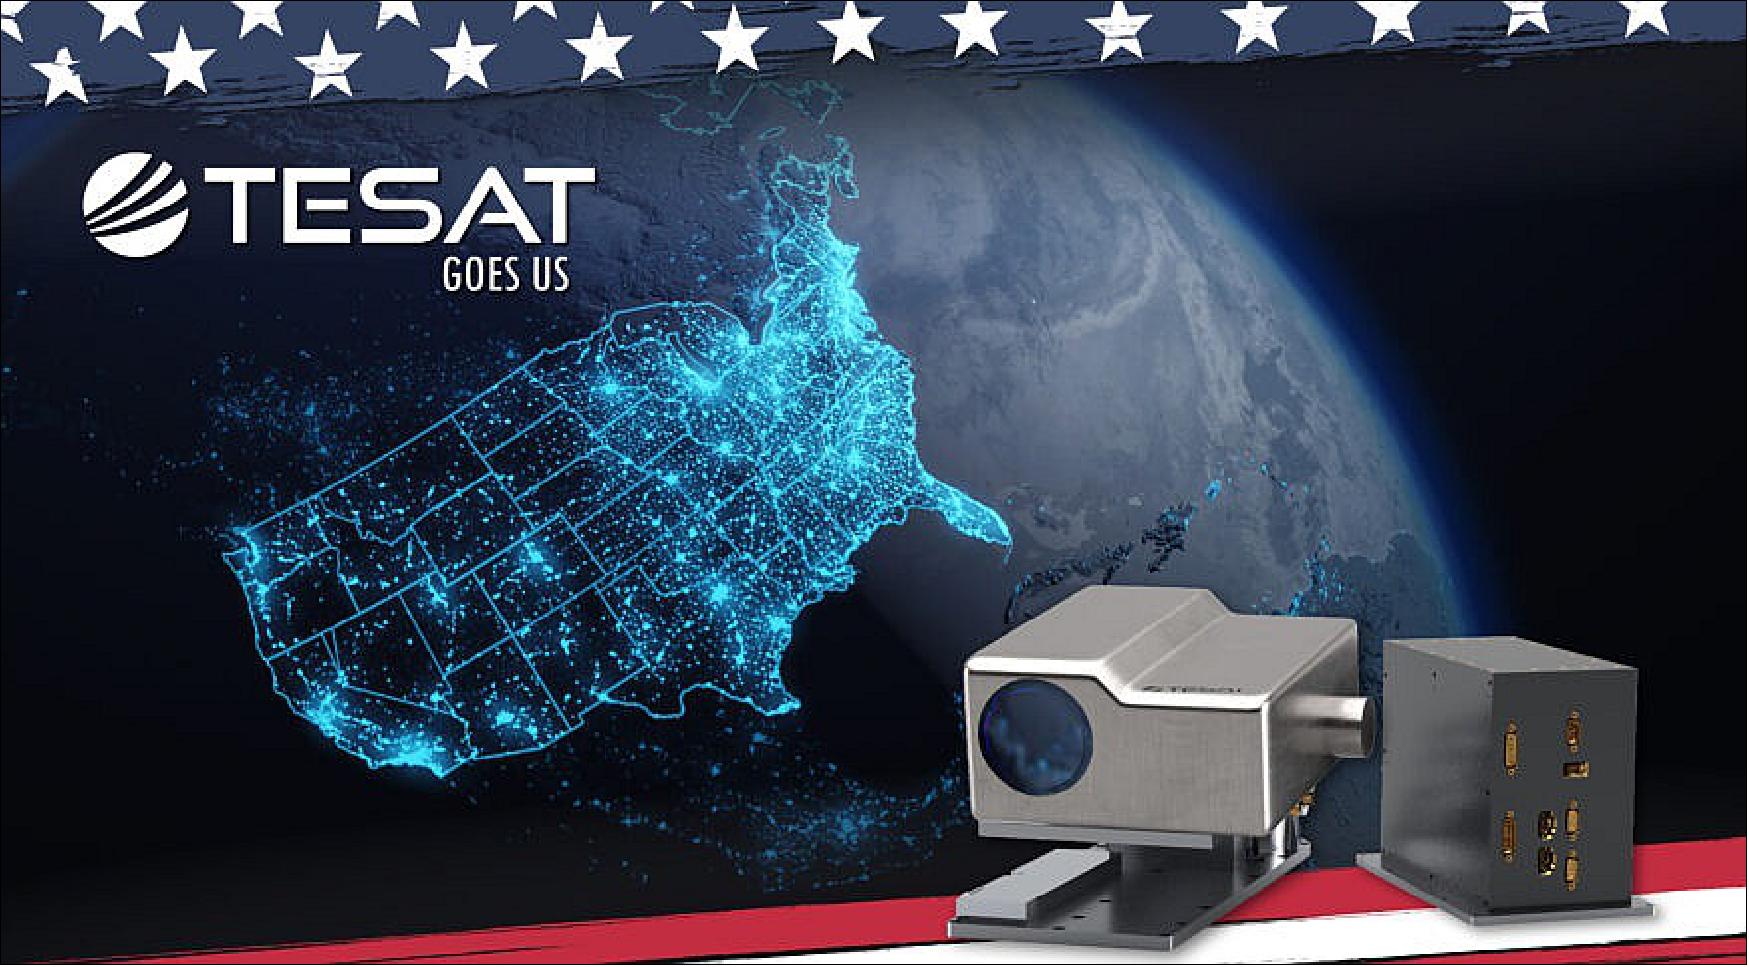 Figure 1: Tesat-Spacecom (TESAT), the global leader in optical communication technologies for space, is expanding its manufacturing footprint into the United States to support its U.S. government and commercial customers (image credit: Tesat)